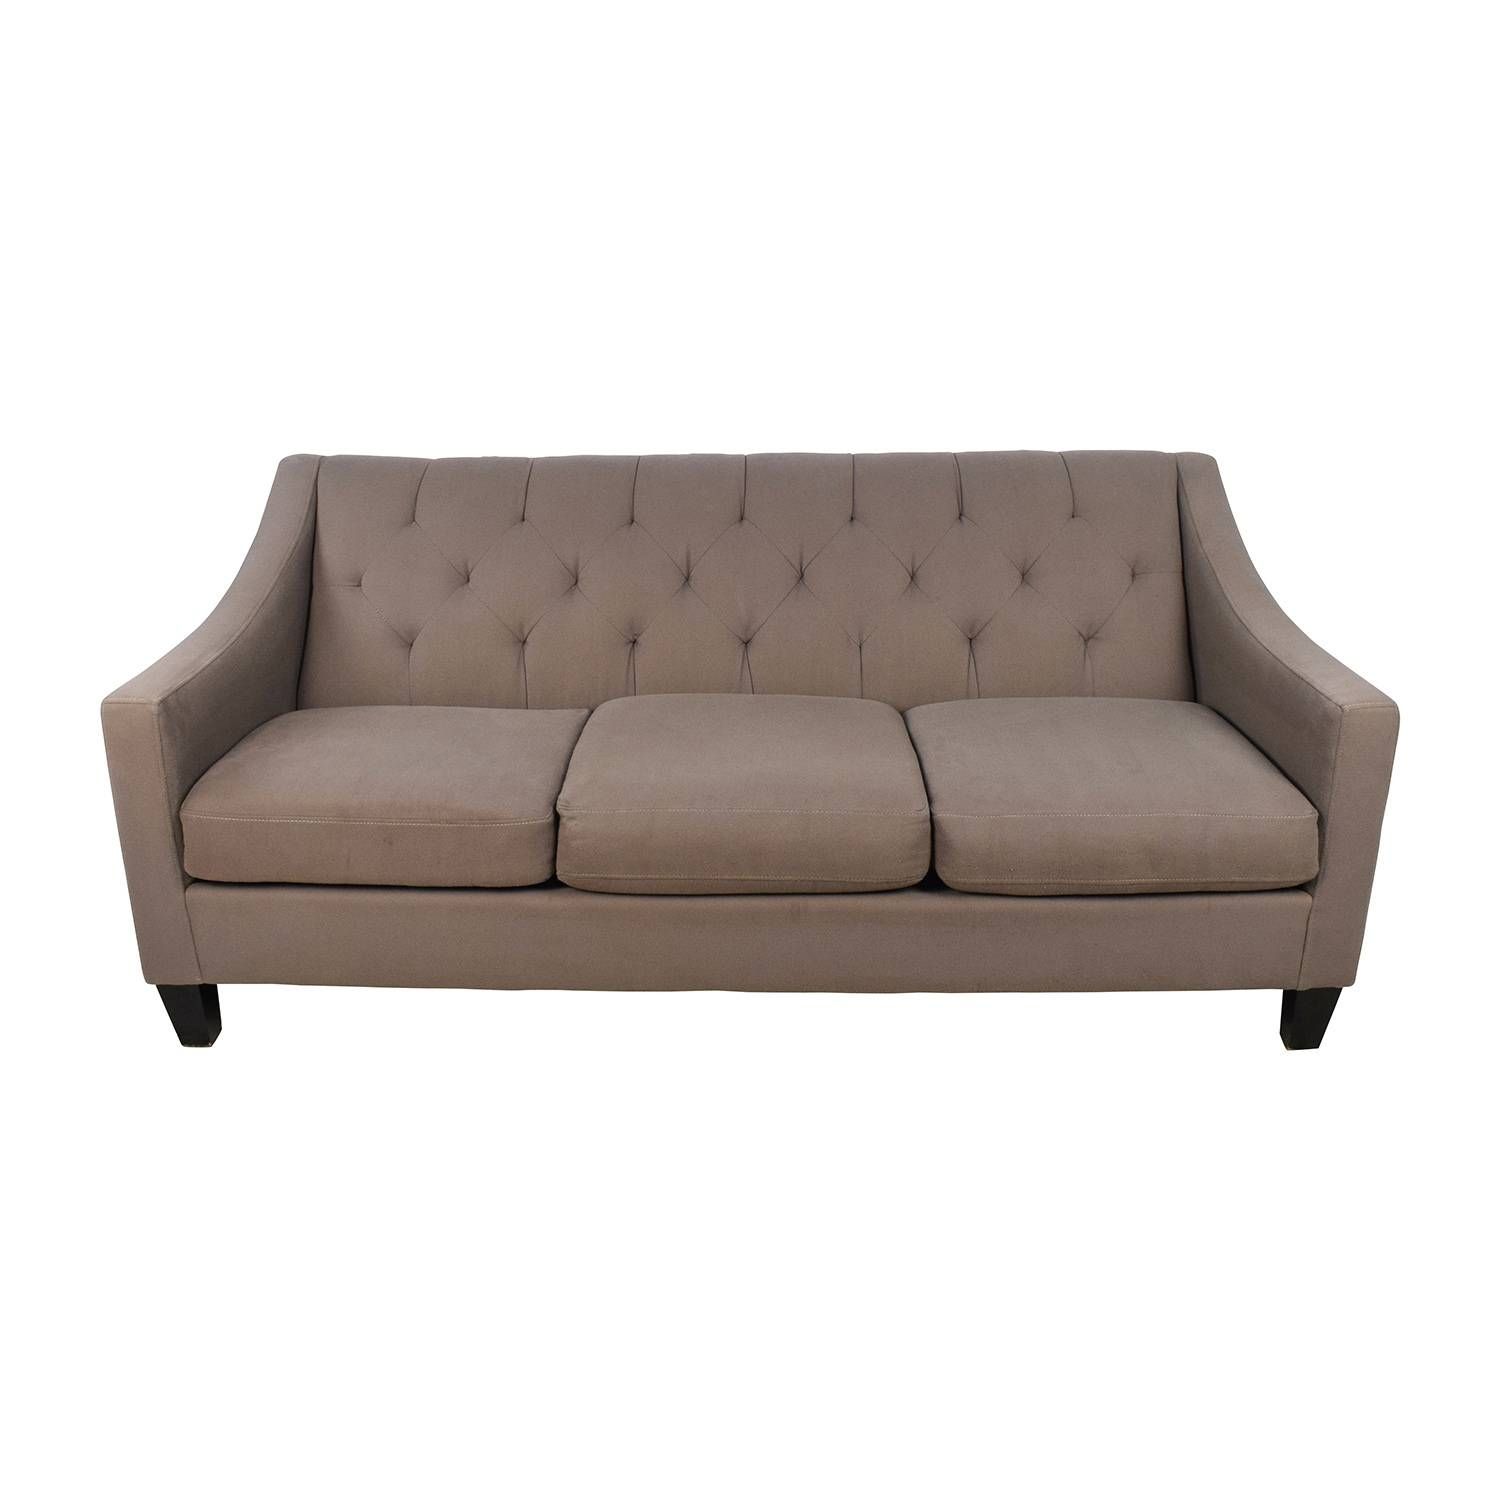 65% Off – Macy's Macy's Tufted Back Grey Couch / Sofas Pertaining To Macys Sofas (View 20 of 25)